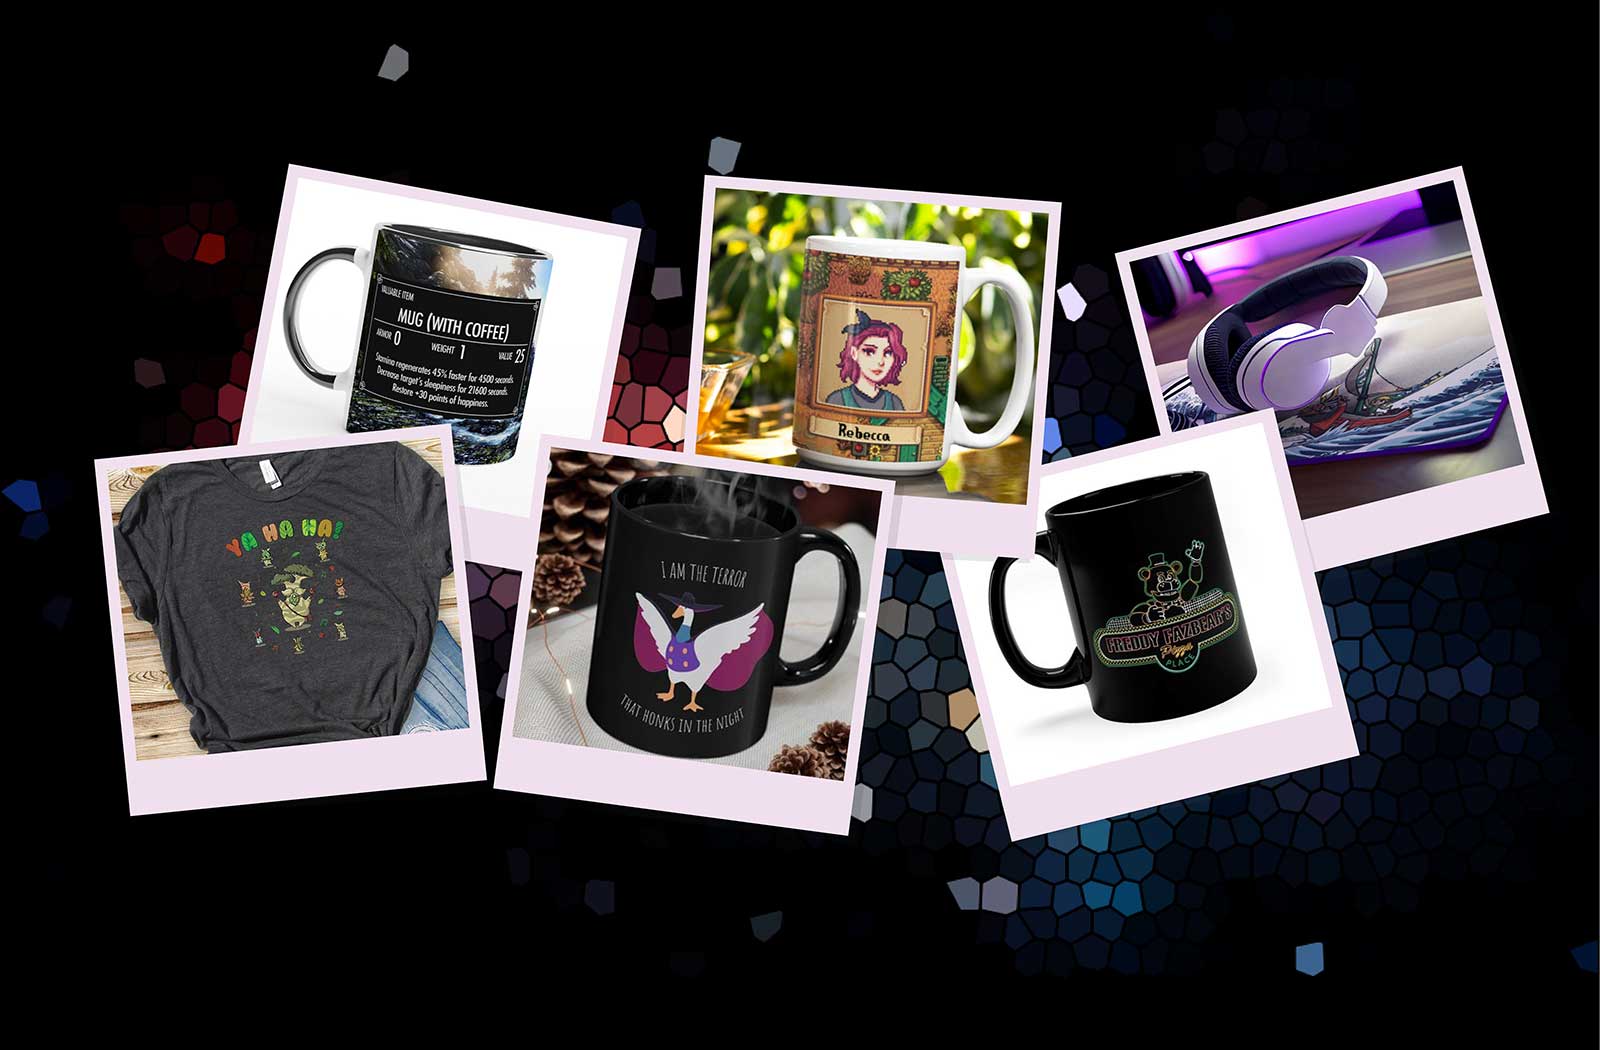 Be the top scoring gift-giver with our unofficial and unique gaming gifts, clothing, mugs and accessories with free UK Delivery & Same Day Dispatch (conditions apply)